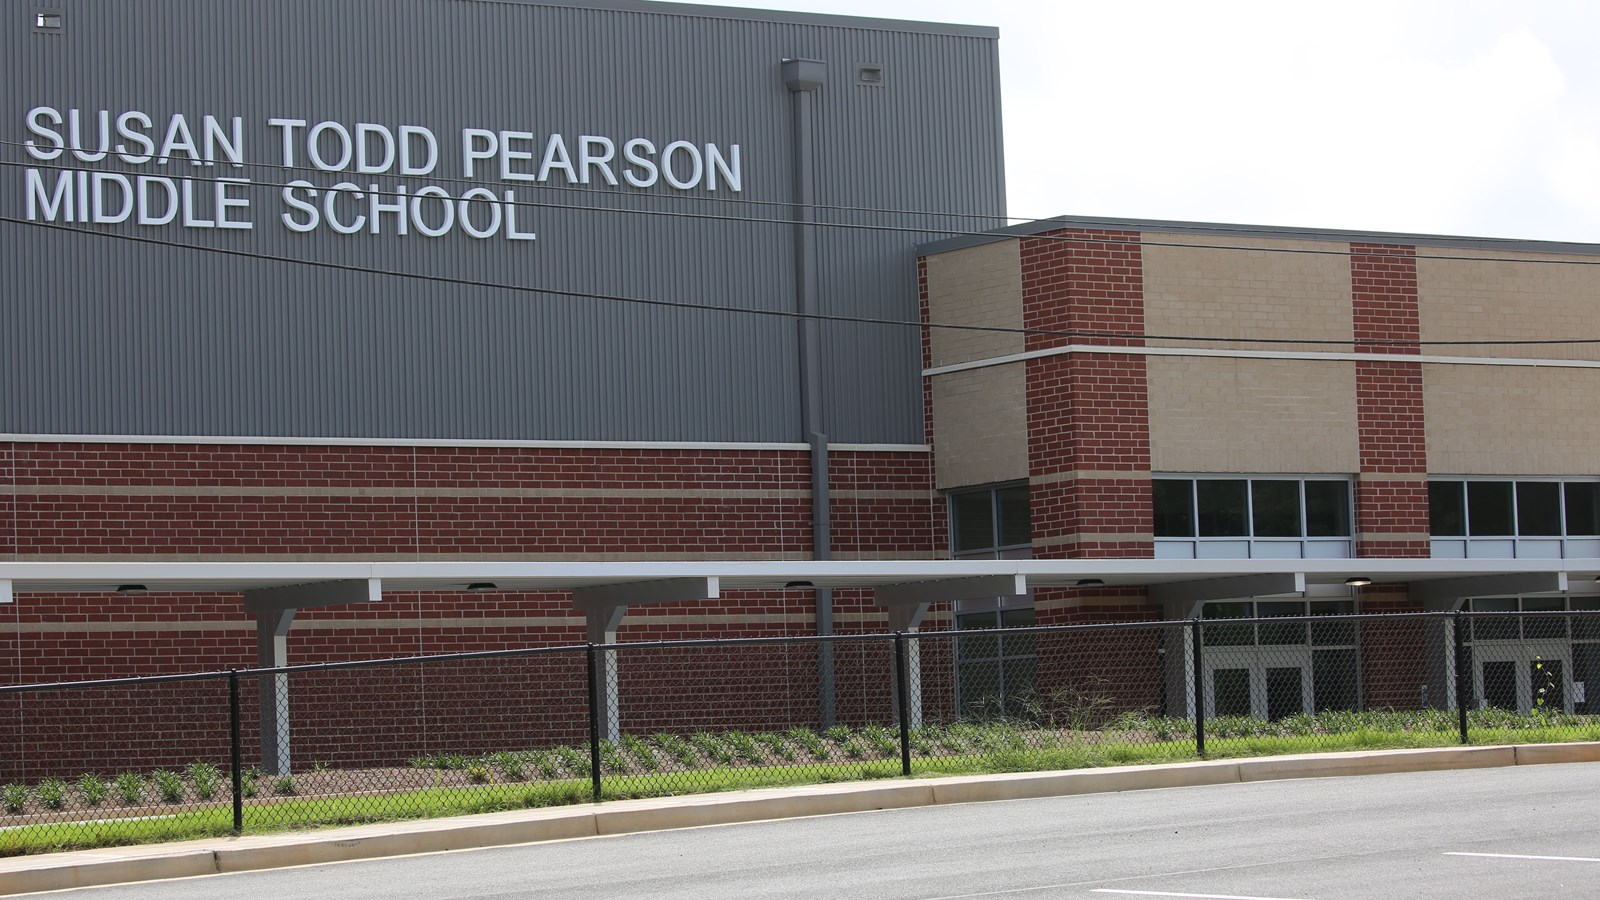 Pearson Middle School welcomed students for inaugural year in August 2021